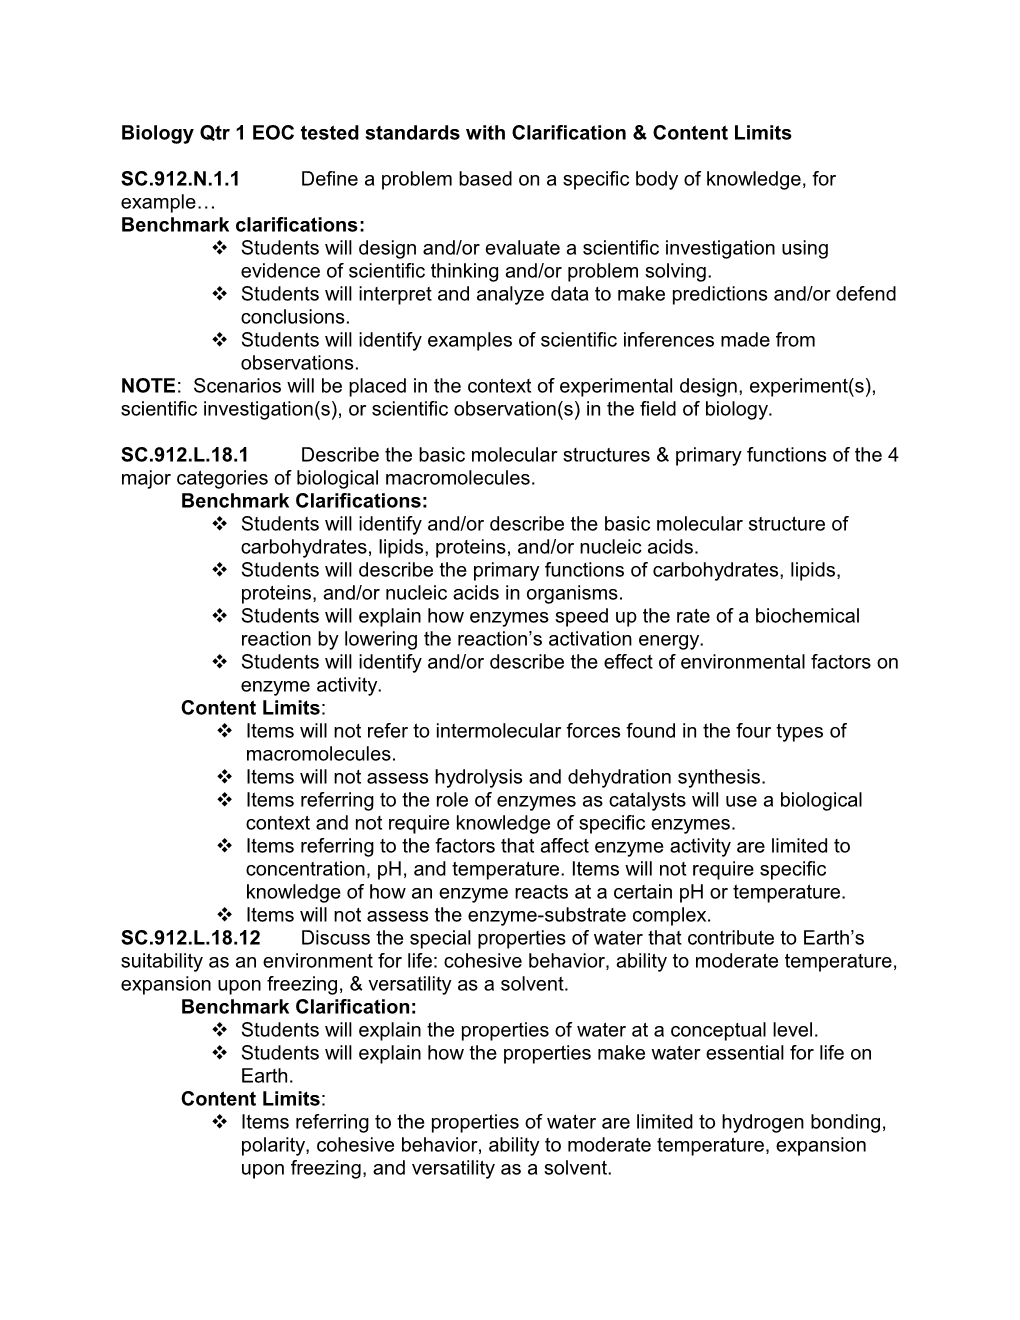 Biology Qtr 1 EOC Tested Standards with Clarification & Content Limits